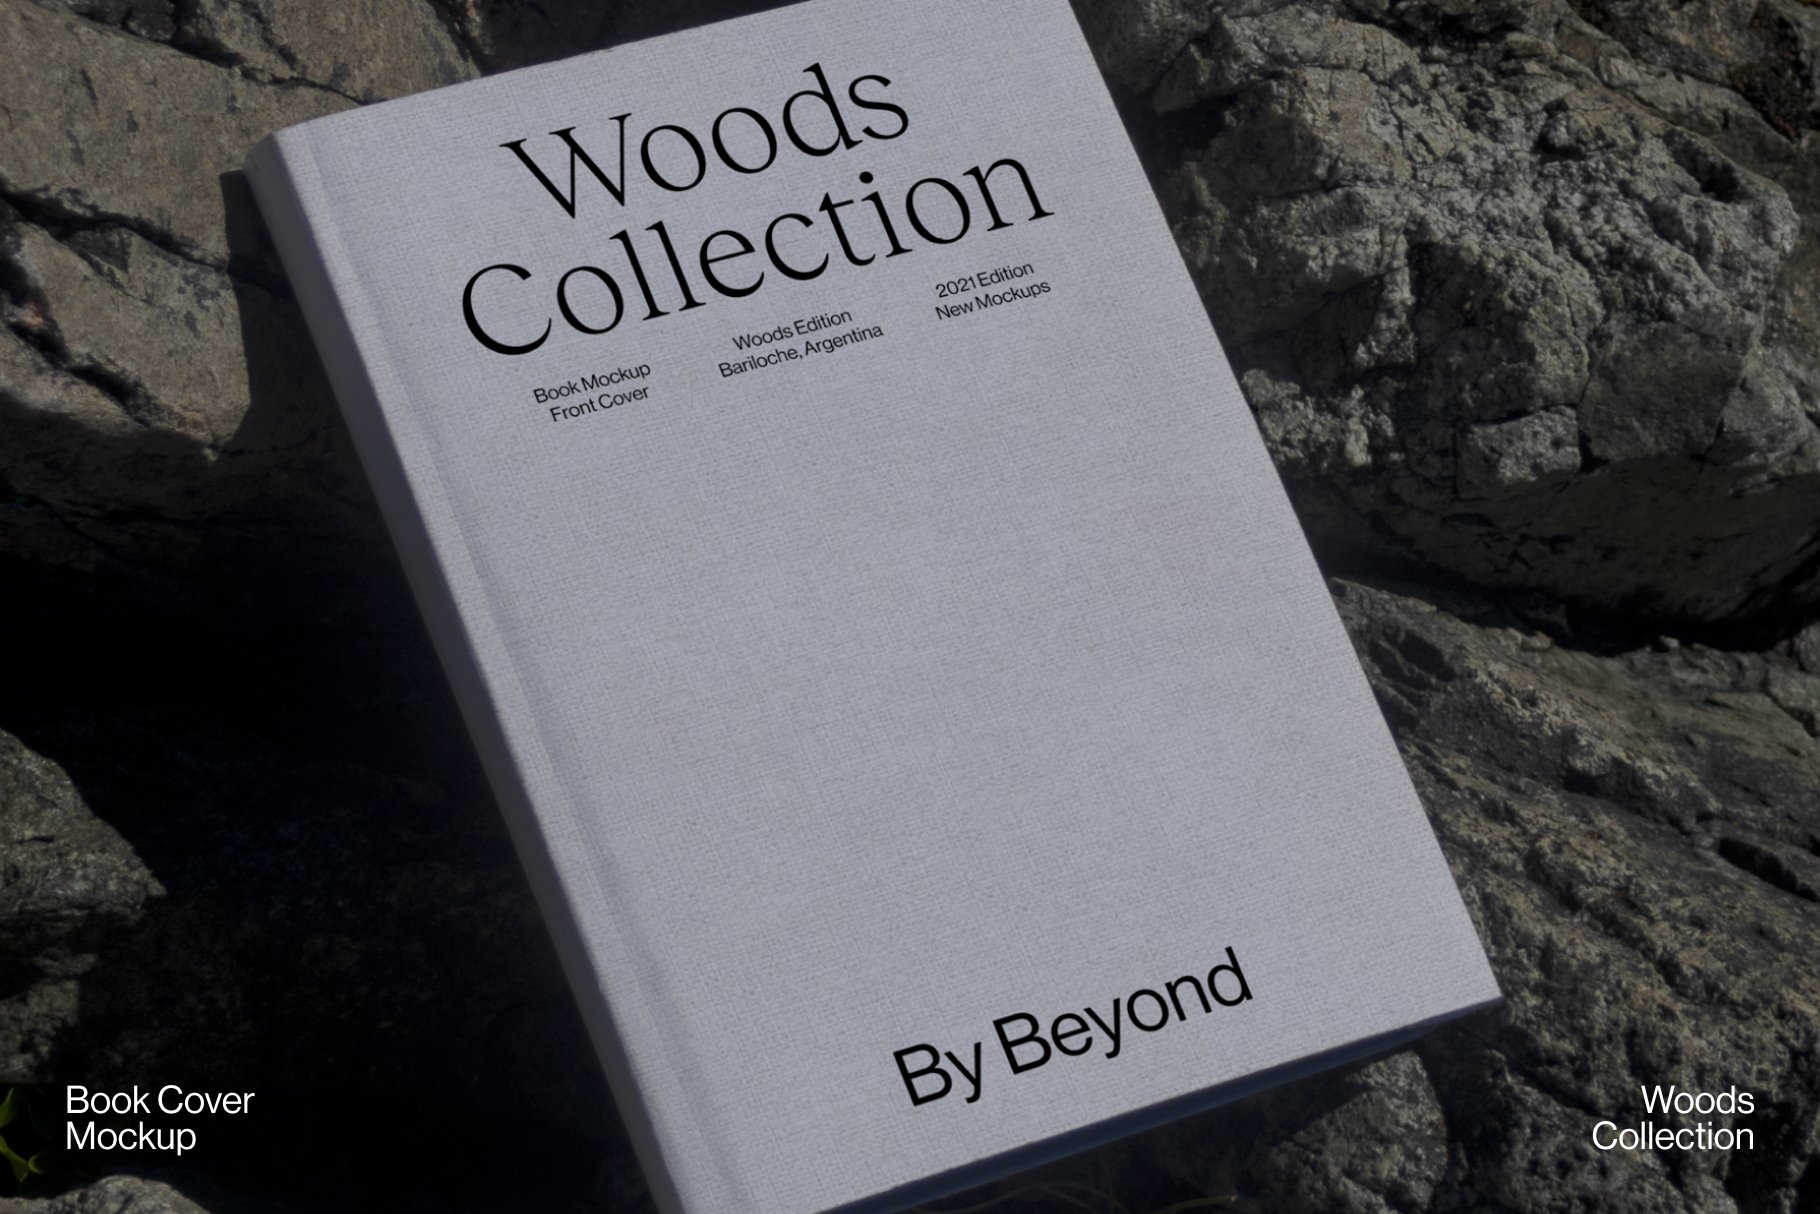 Woods Collection Book Cover Mockup 2 preview image.